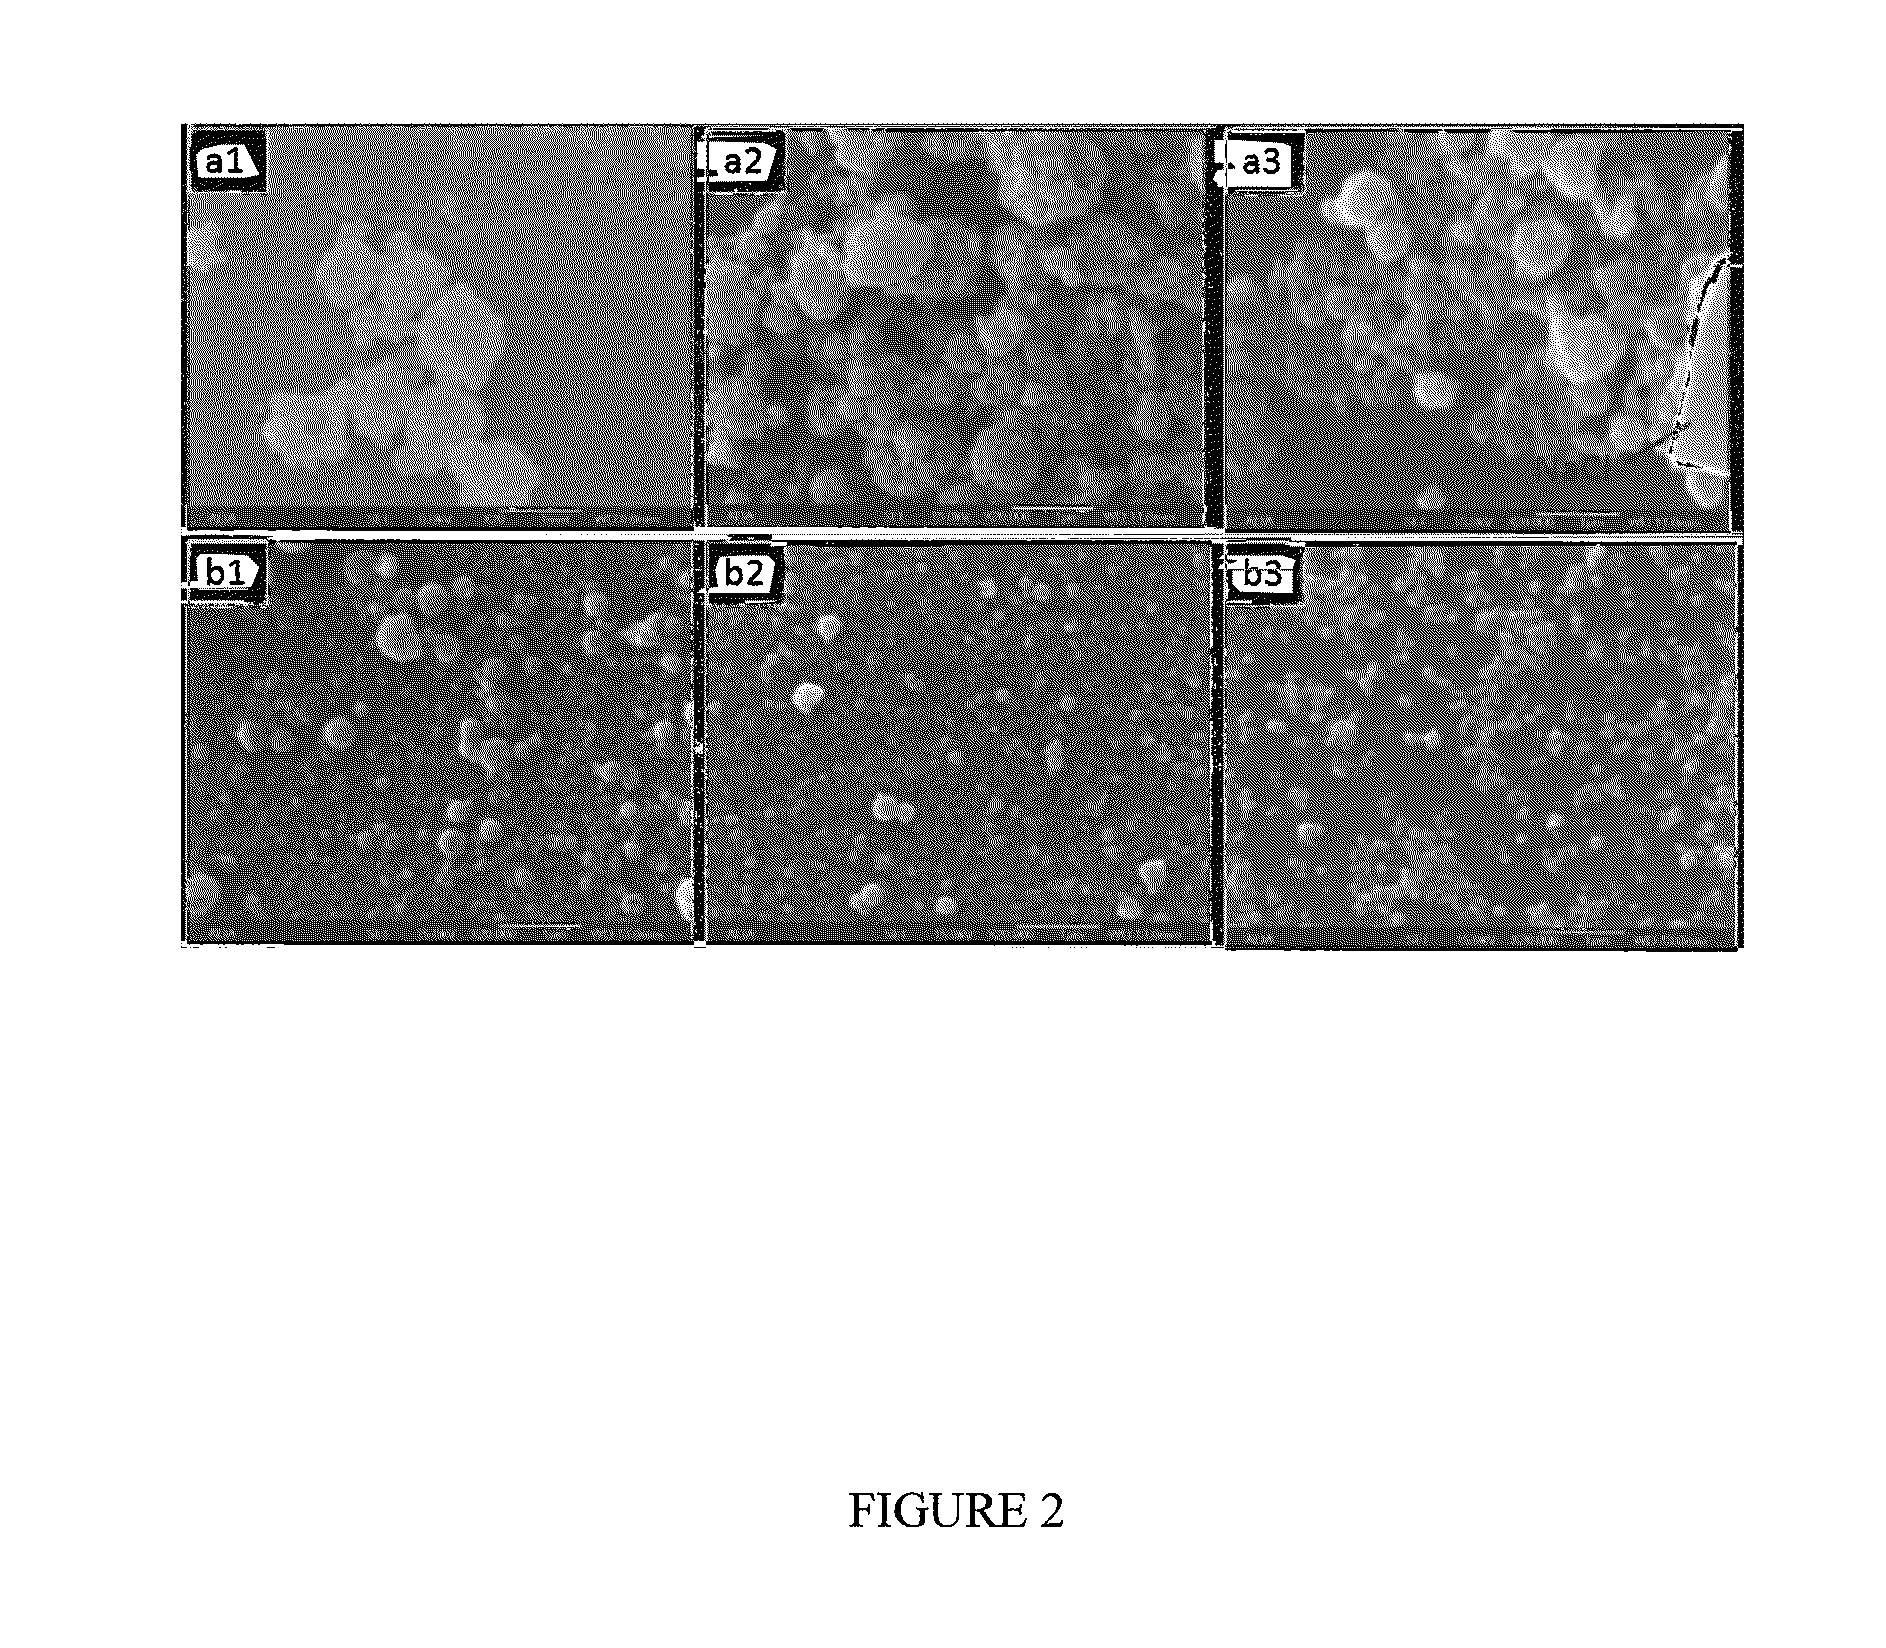 Method for preparation of well-dispersed, discrete nanoparticles by spray drying techniques